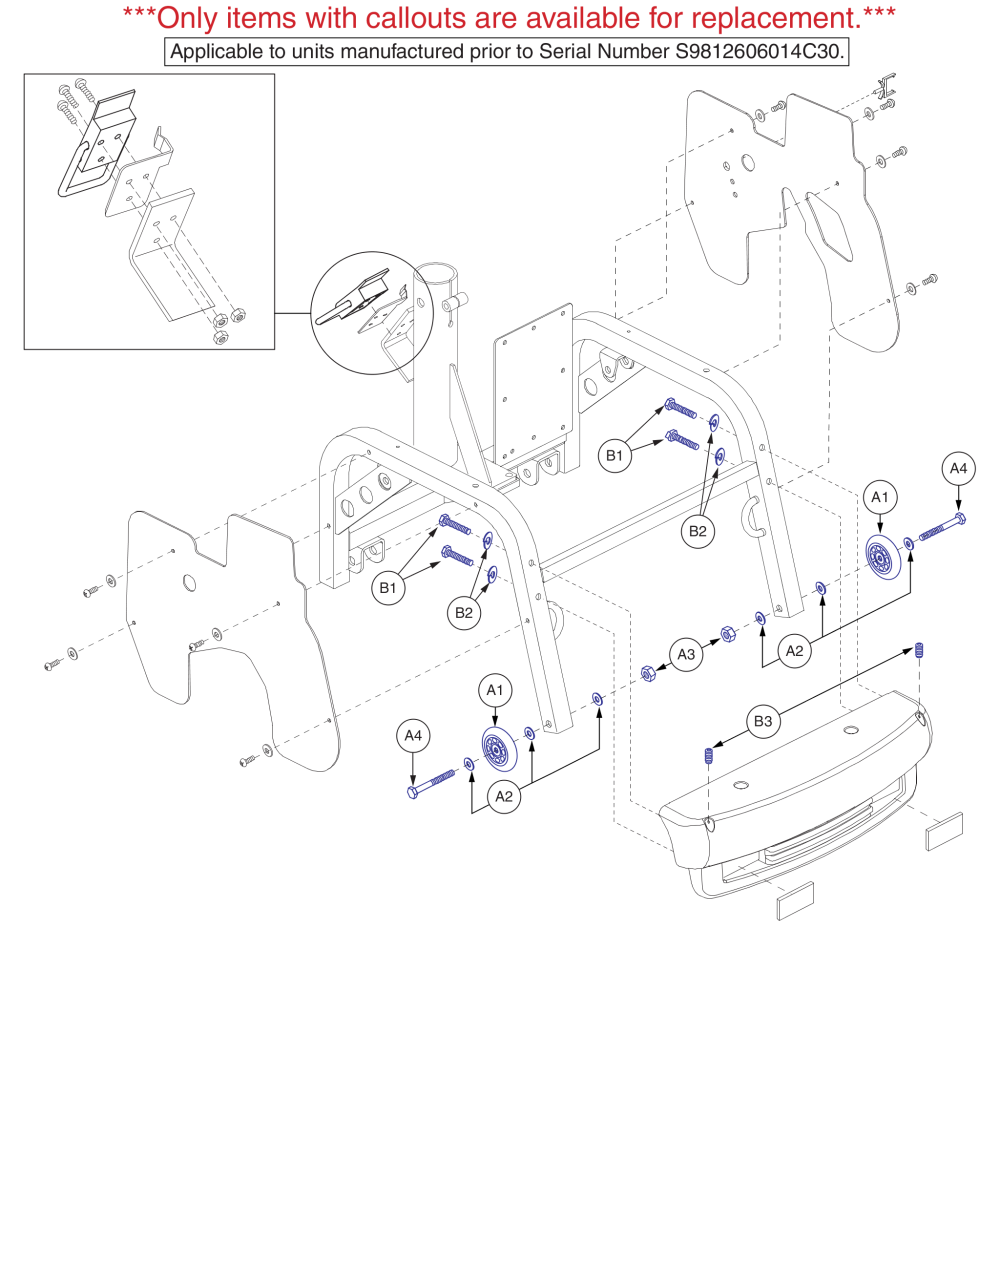 Hurricane Pmv5001 Rear Frameassy W/ Anti-tips, Hook Lock Up And Hardware (gen. 1).  (prior To S/n S9812606014c30) parts diagram